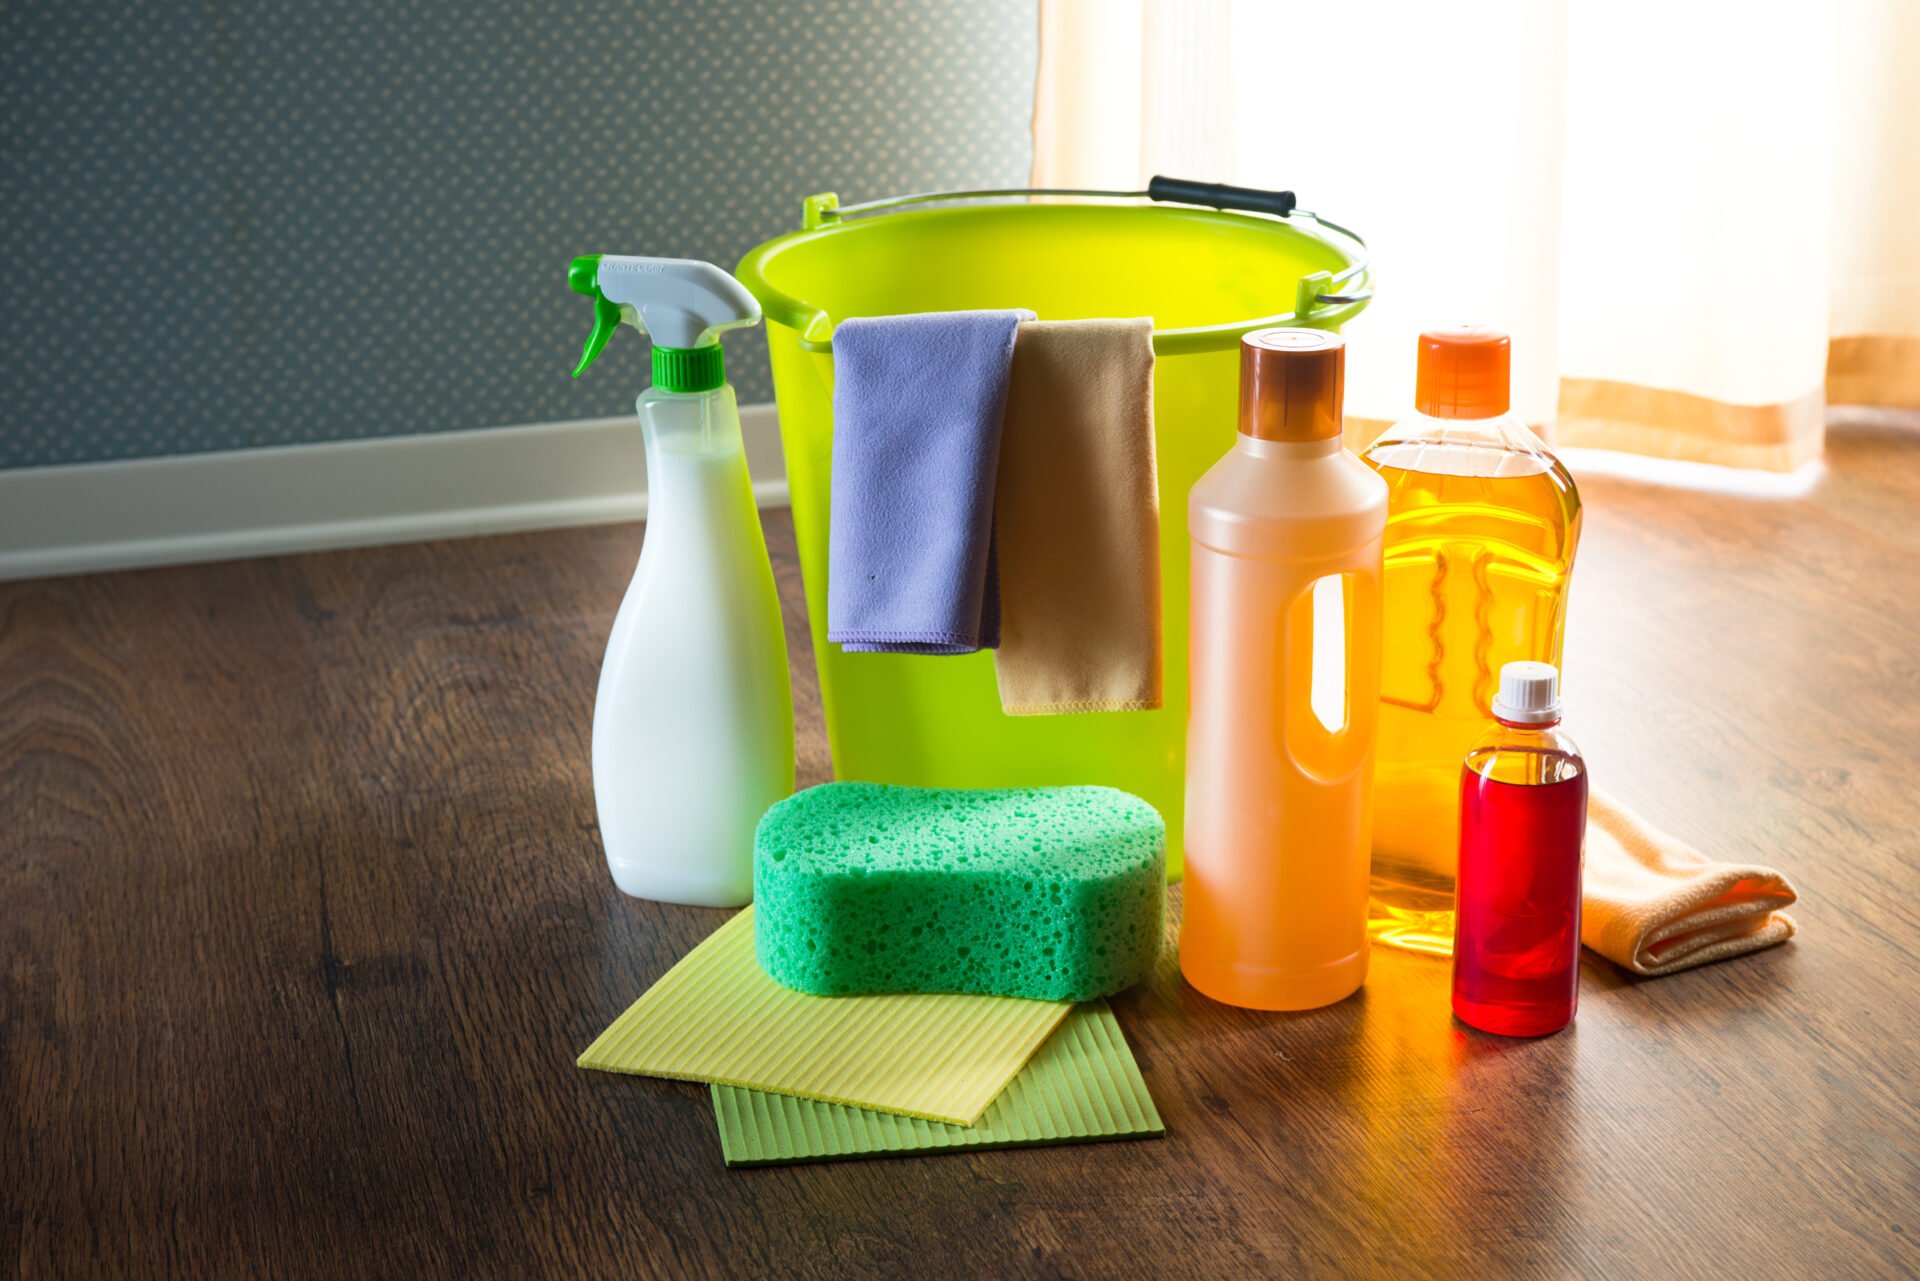 Wood cleaners and detergents on floor with bucket, gloves, cloth and sponges